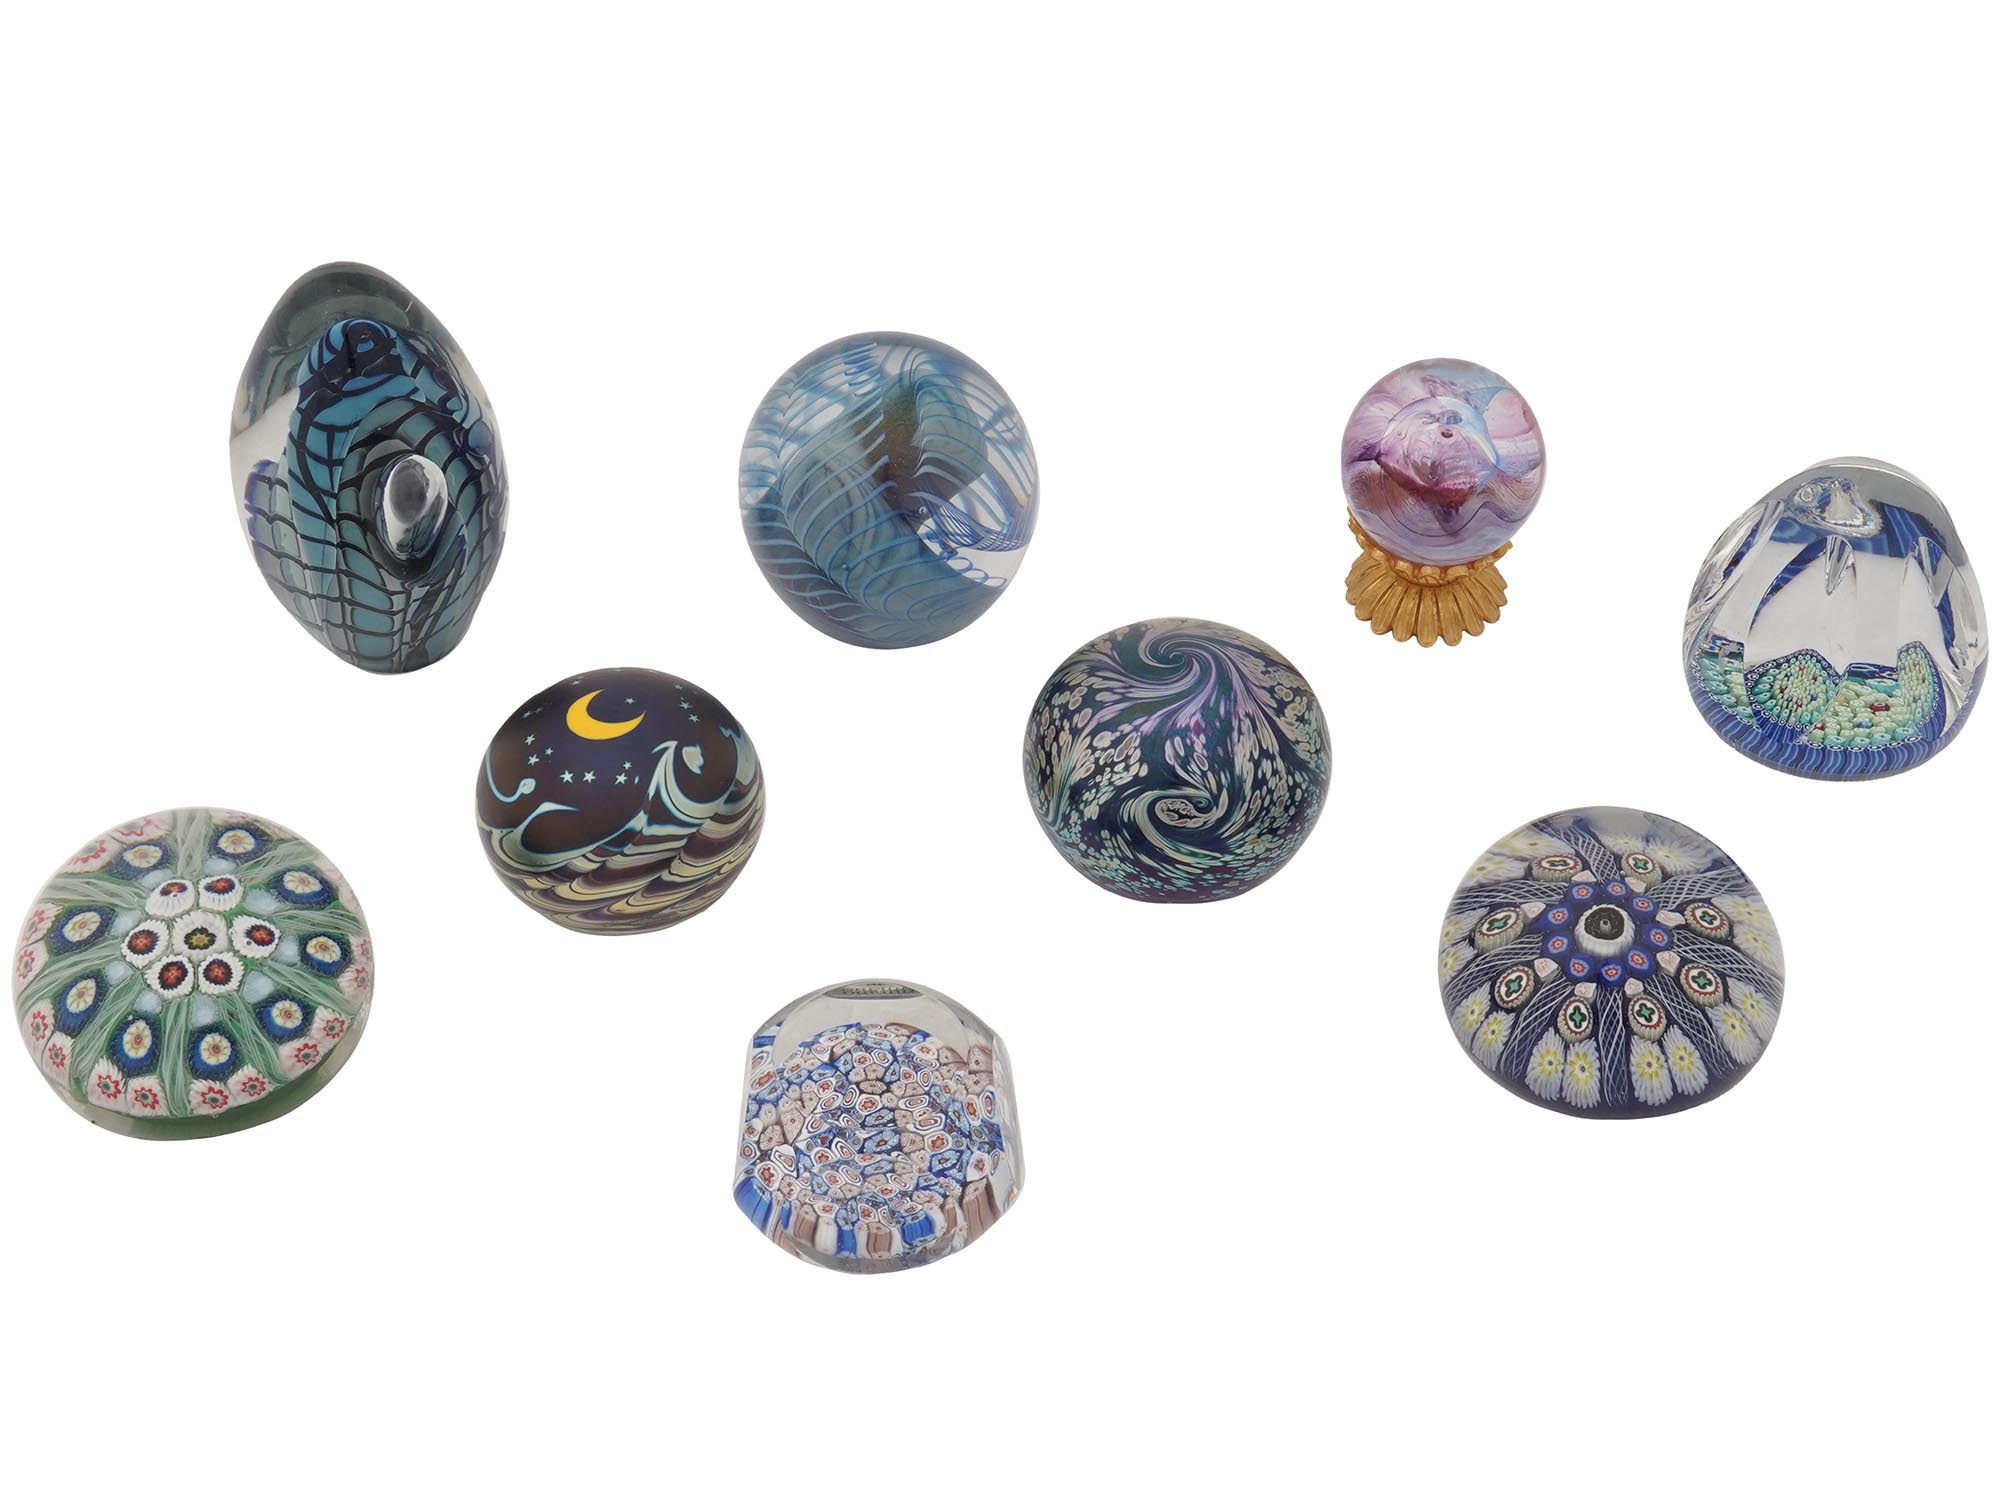 GROUP OF NINE HAND MADE ART GLASS PAPER WEIGHTS PIC-0